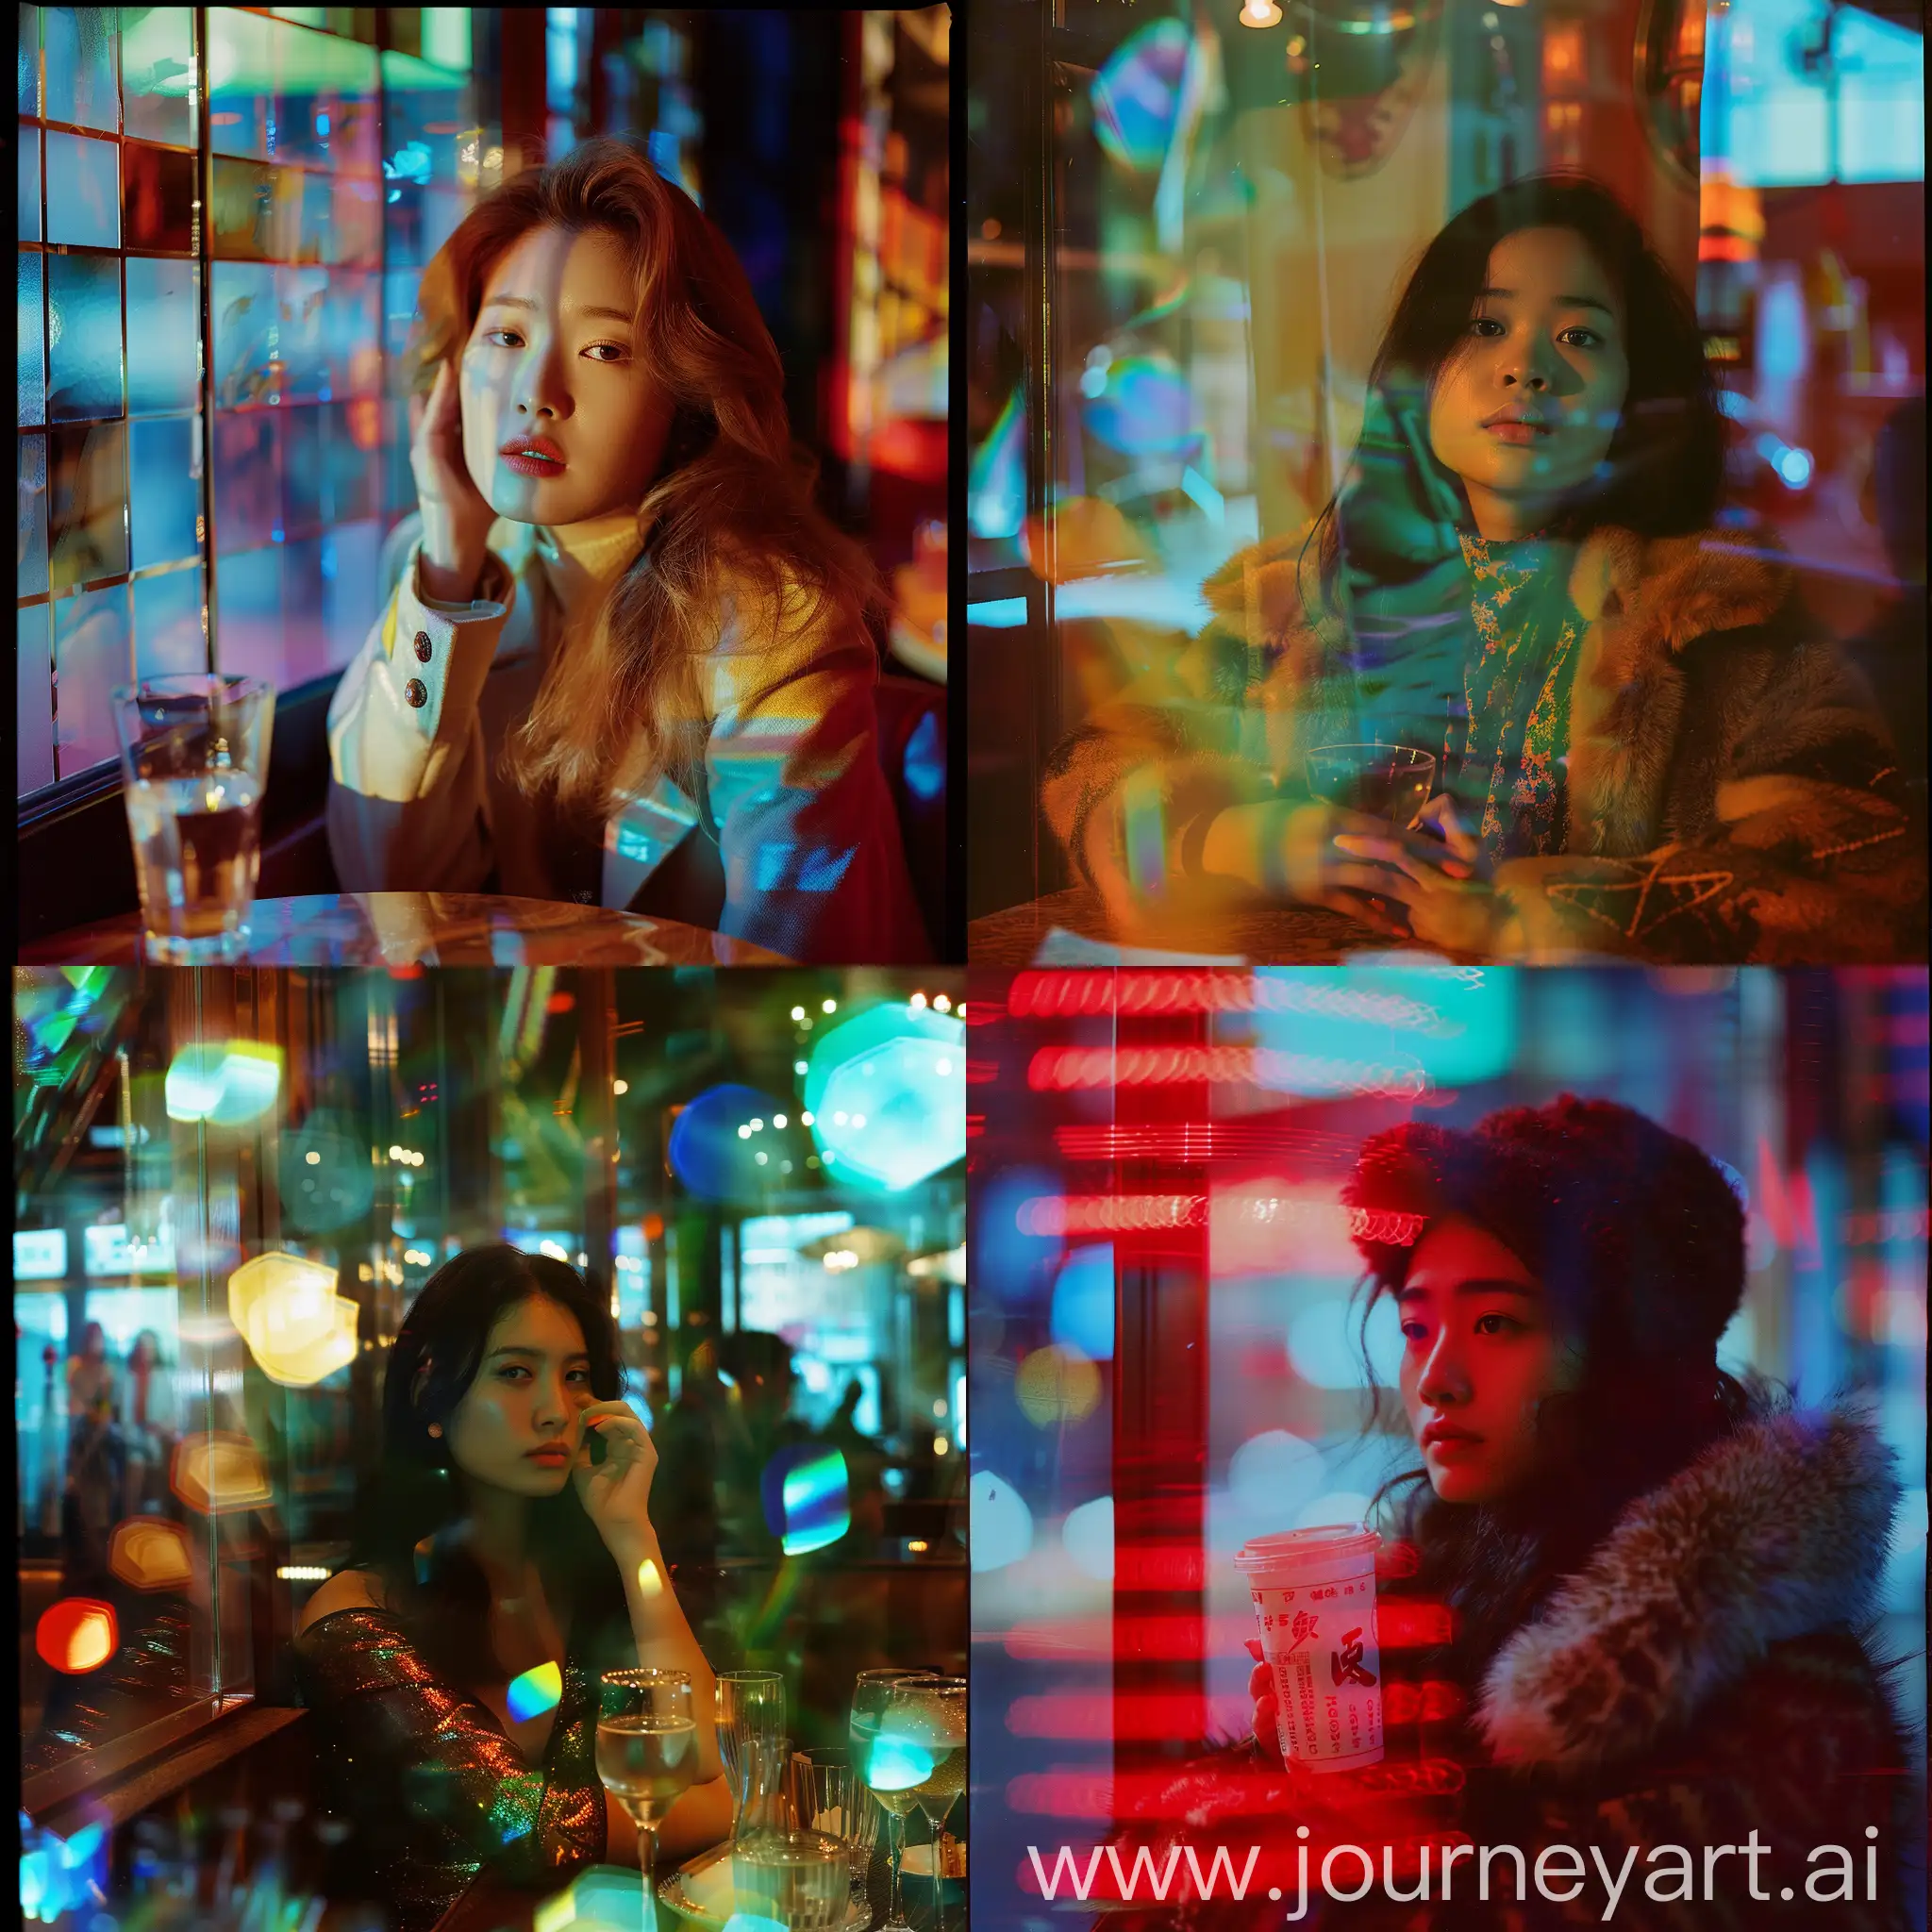 Abstract-Portrait-Blackpinks-Jennie-in-Mink-Coat-Sipping-Cocktails-with-Dramatic-Penrose-Tiling